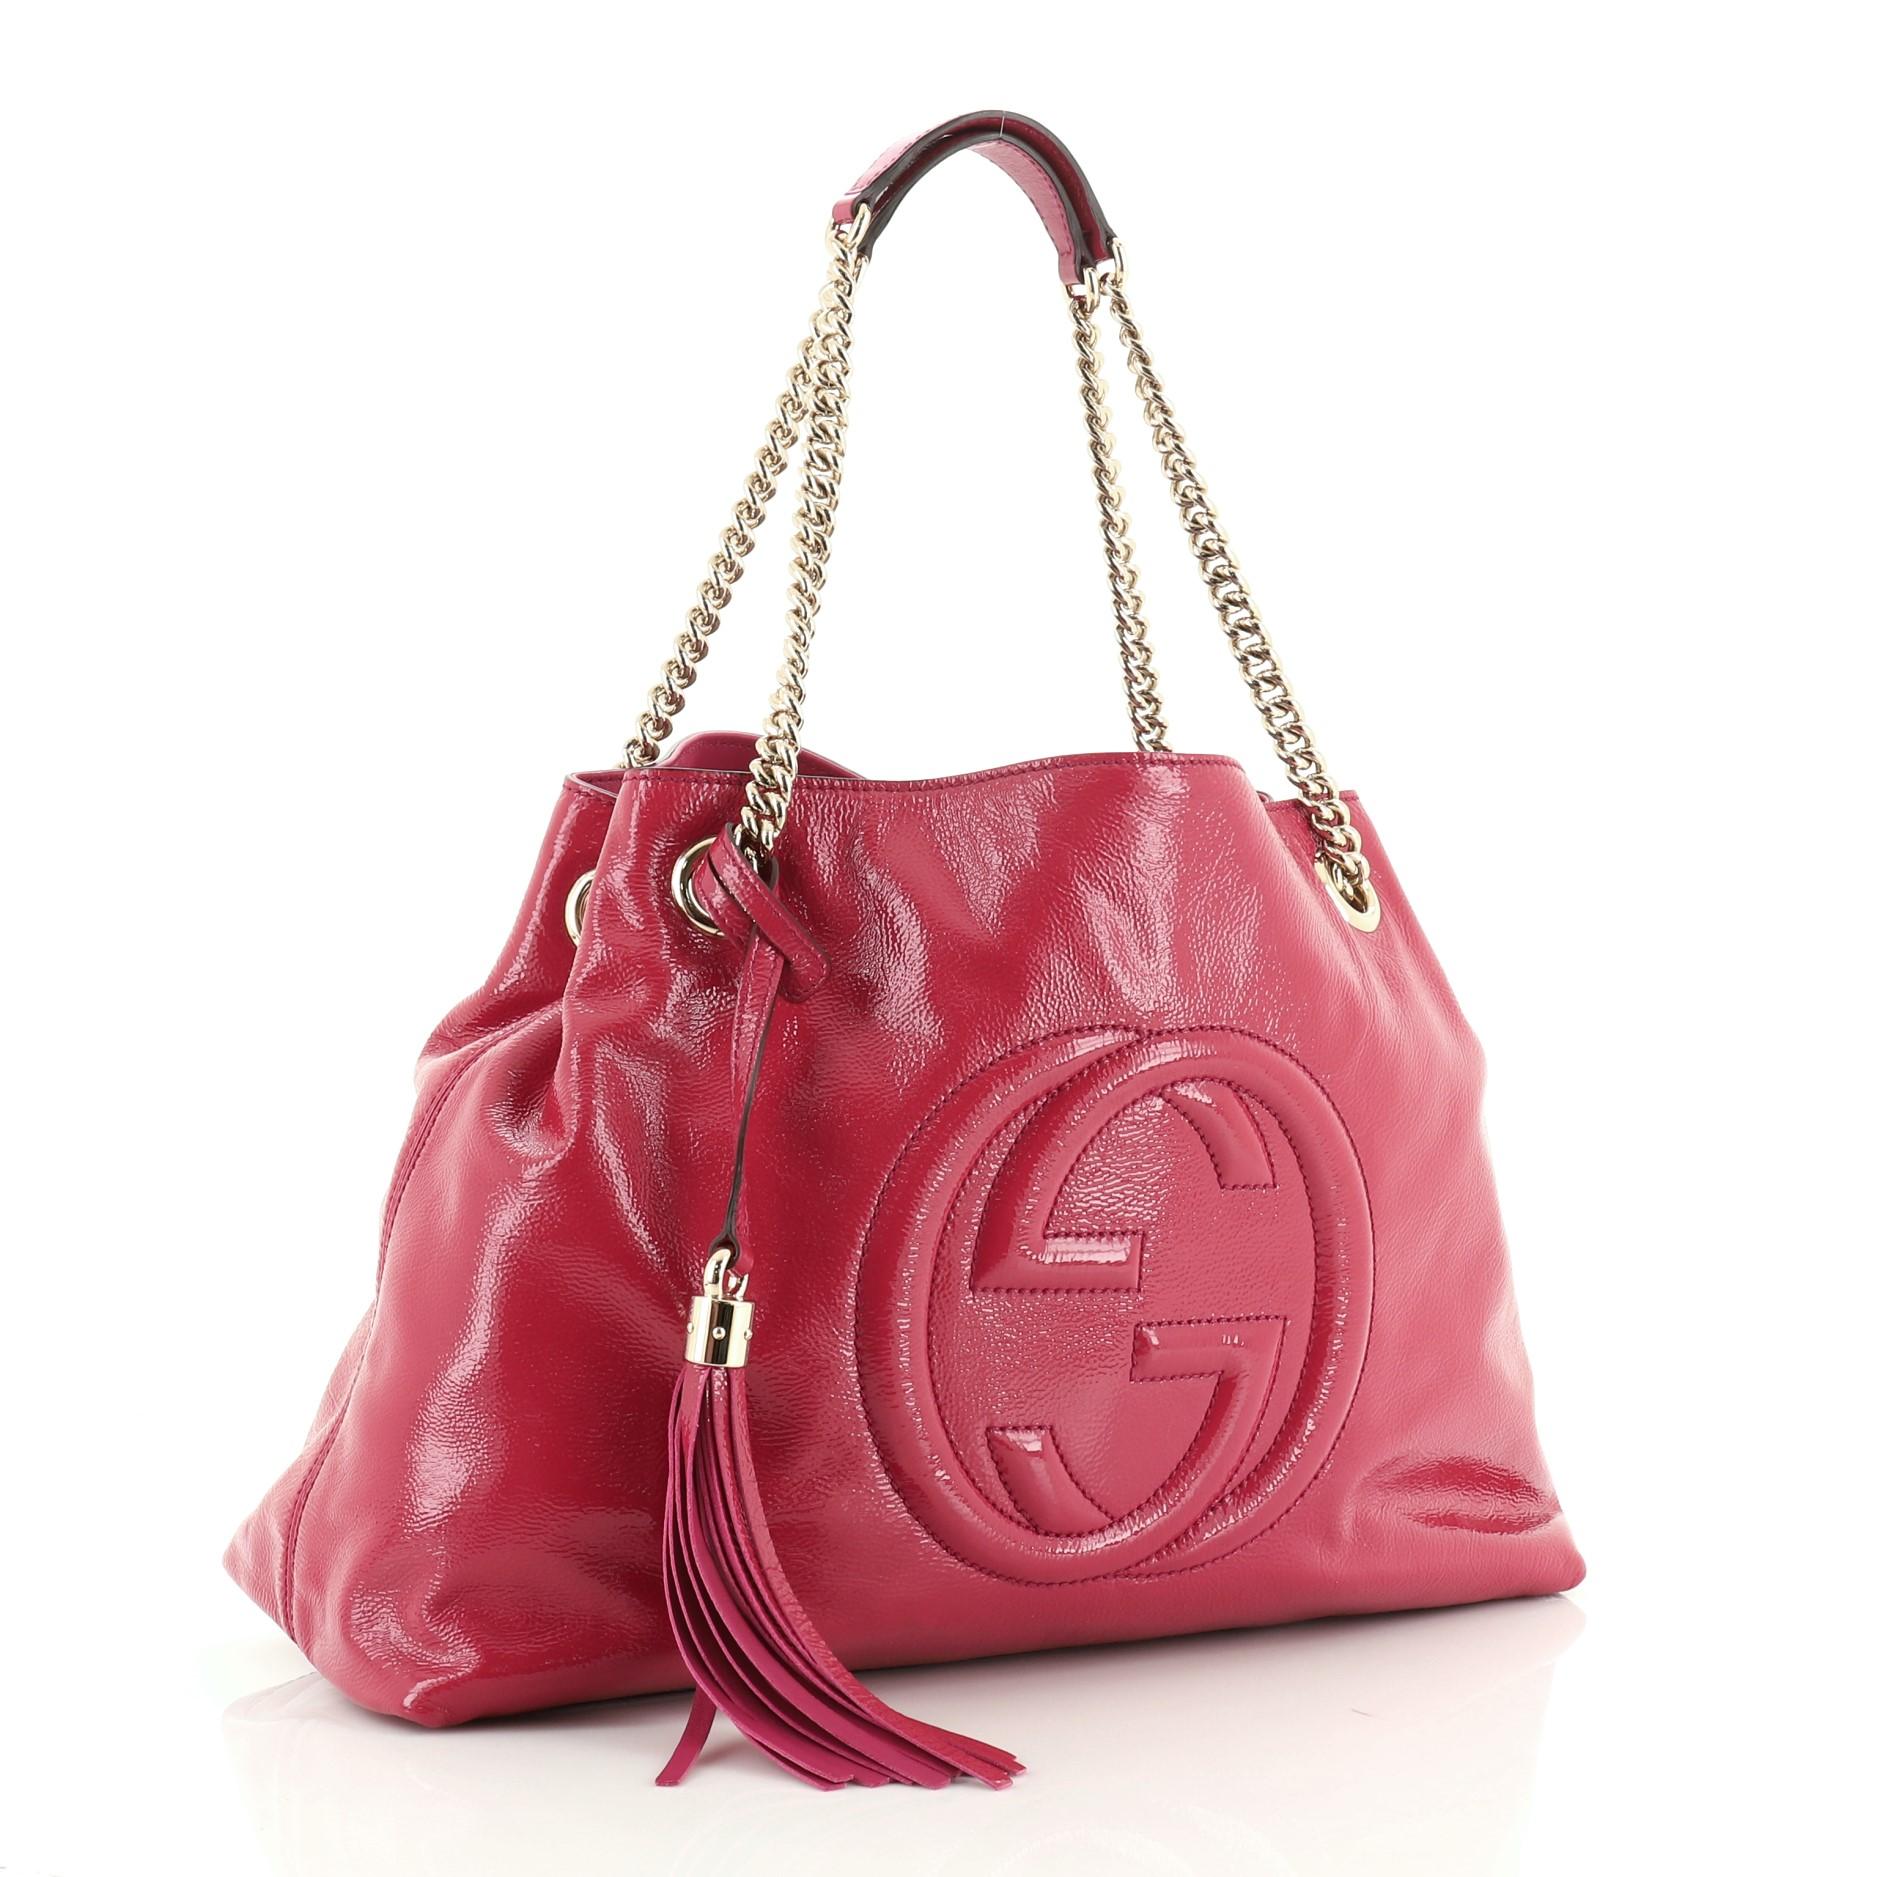 This Gucci Soho Chain Strap Shoulder Bag Patent Medium, crafted in pink patent leather, features chain link straps with leather pads and gold-tone hardware. Its hook clasp closure opens to a neutral fabric interior with side zip and slip pockets.